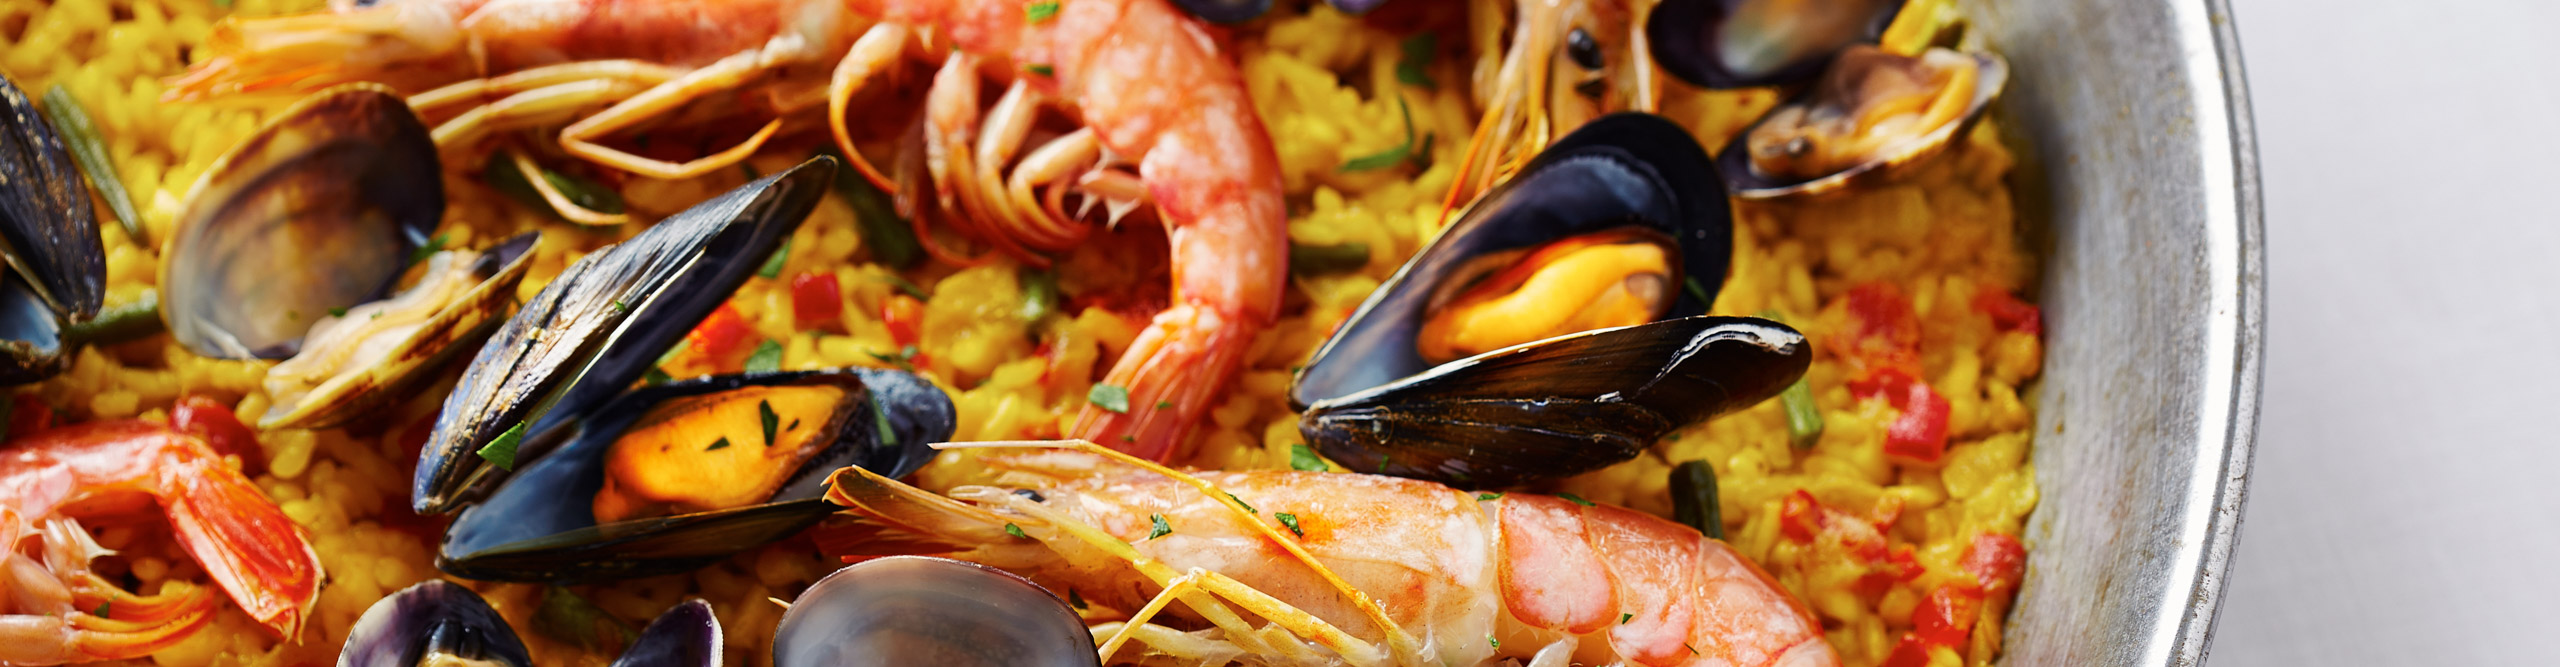 Typical spanish seafood paella in traditional pan